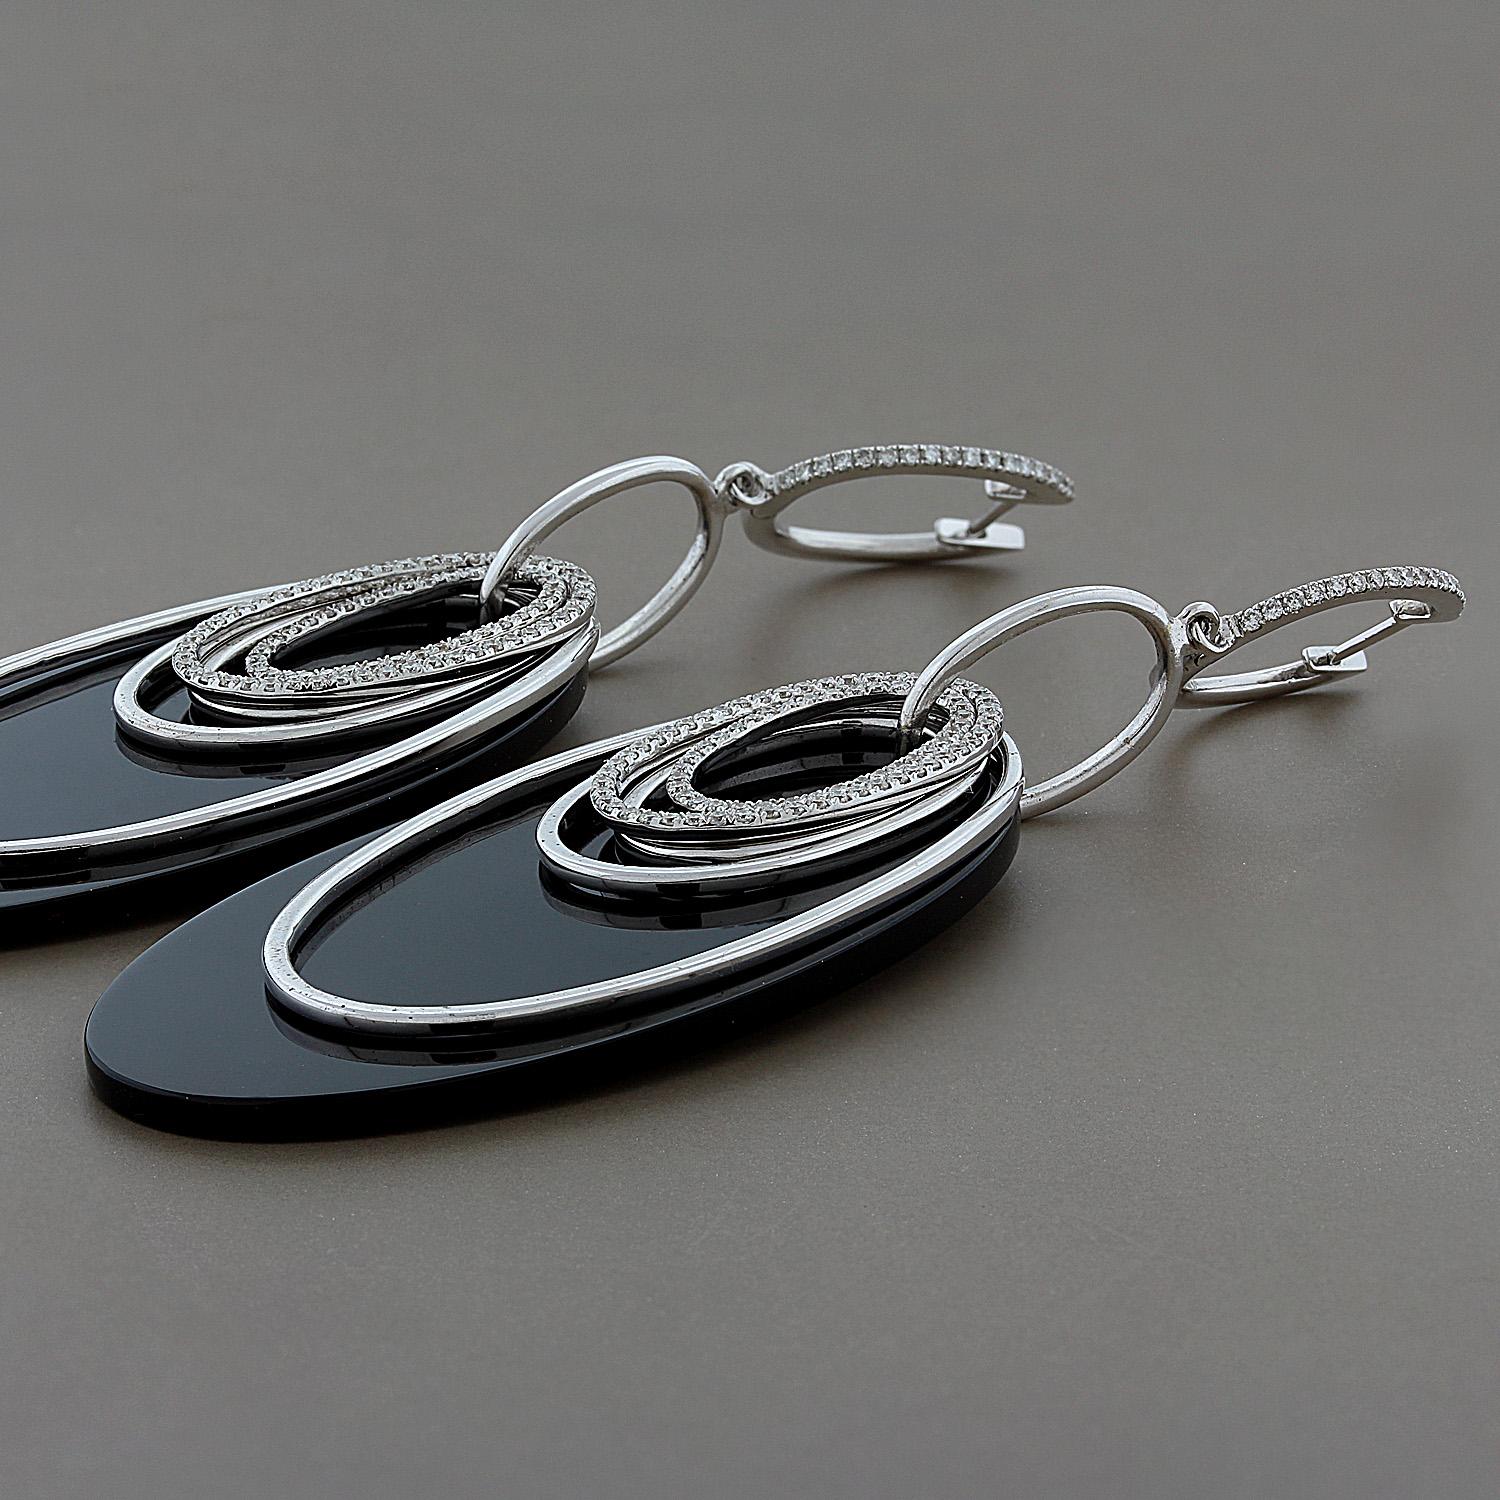 A special pair of earrings designed and crafted in Italy. They feature two smooth pieces of sleek black onyx which is the backdrop for 5 white gold hoop drops. The difference in color between the black onyx, white gold and 1.43 carats of diamond